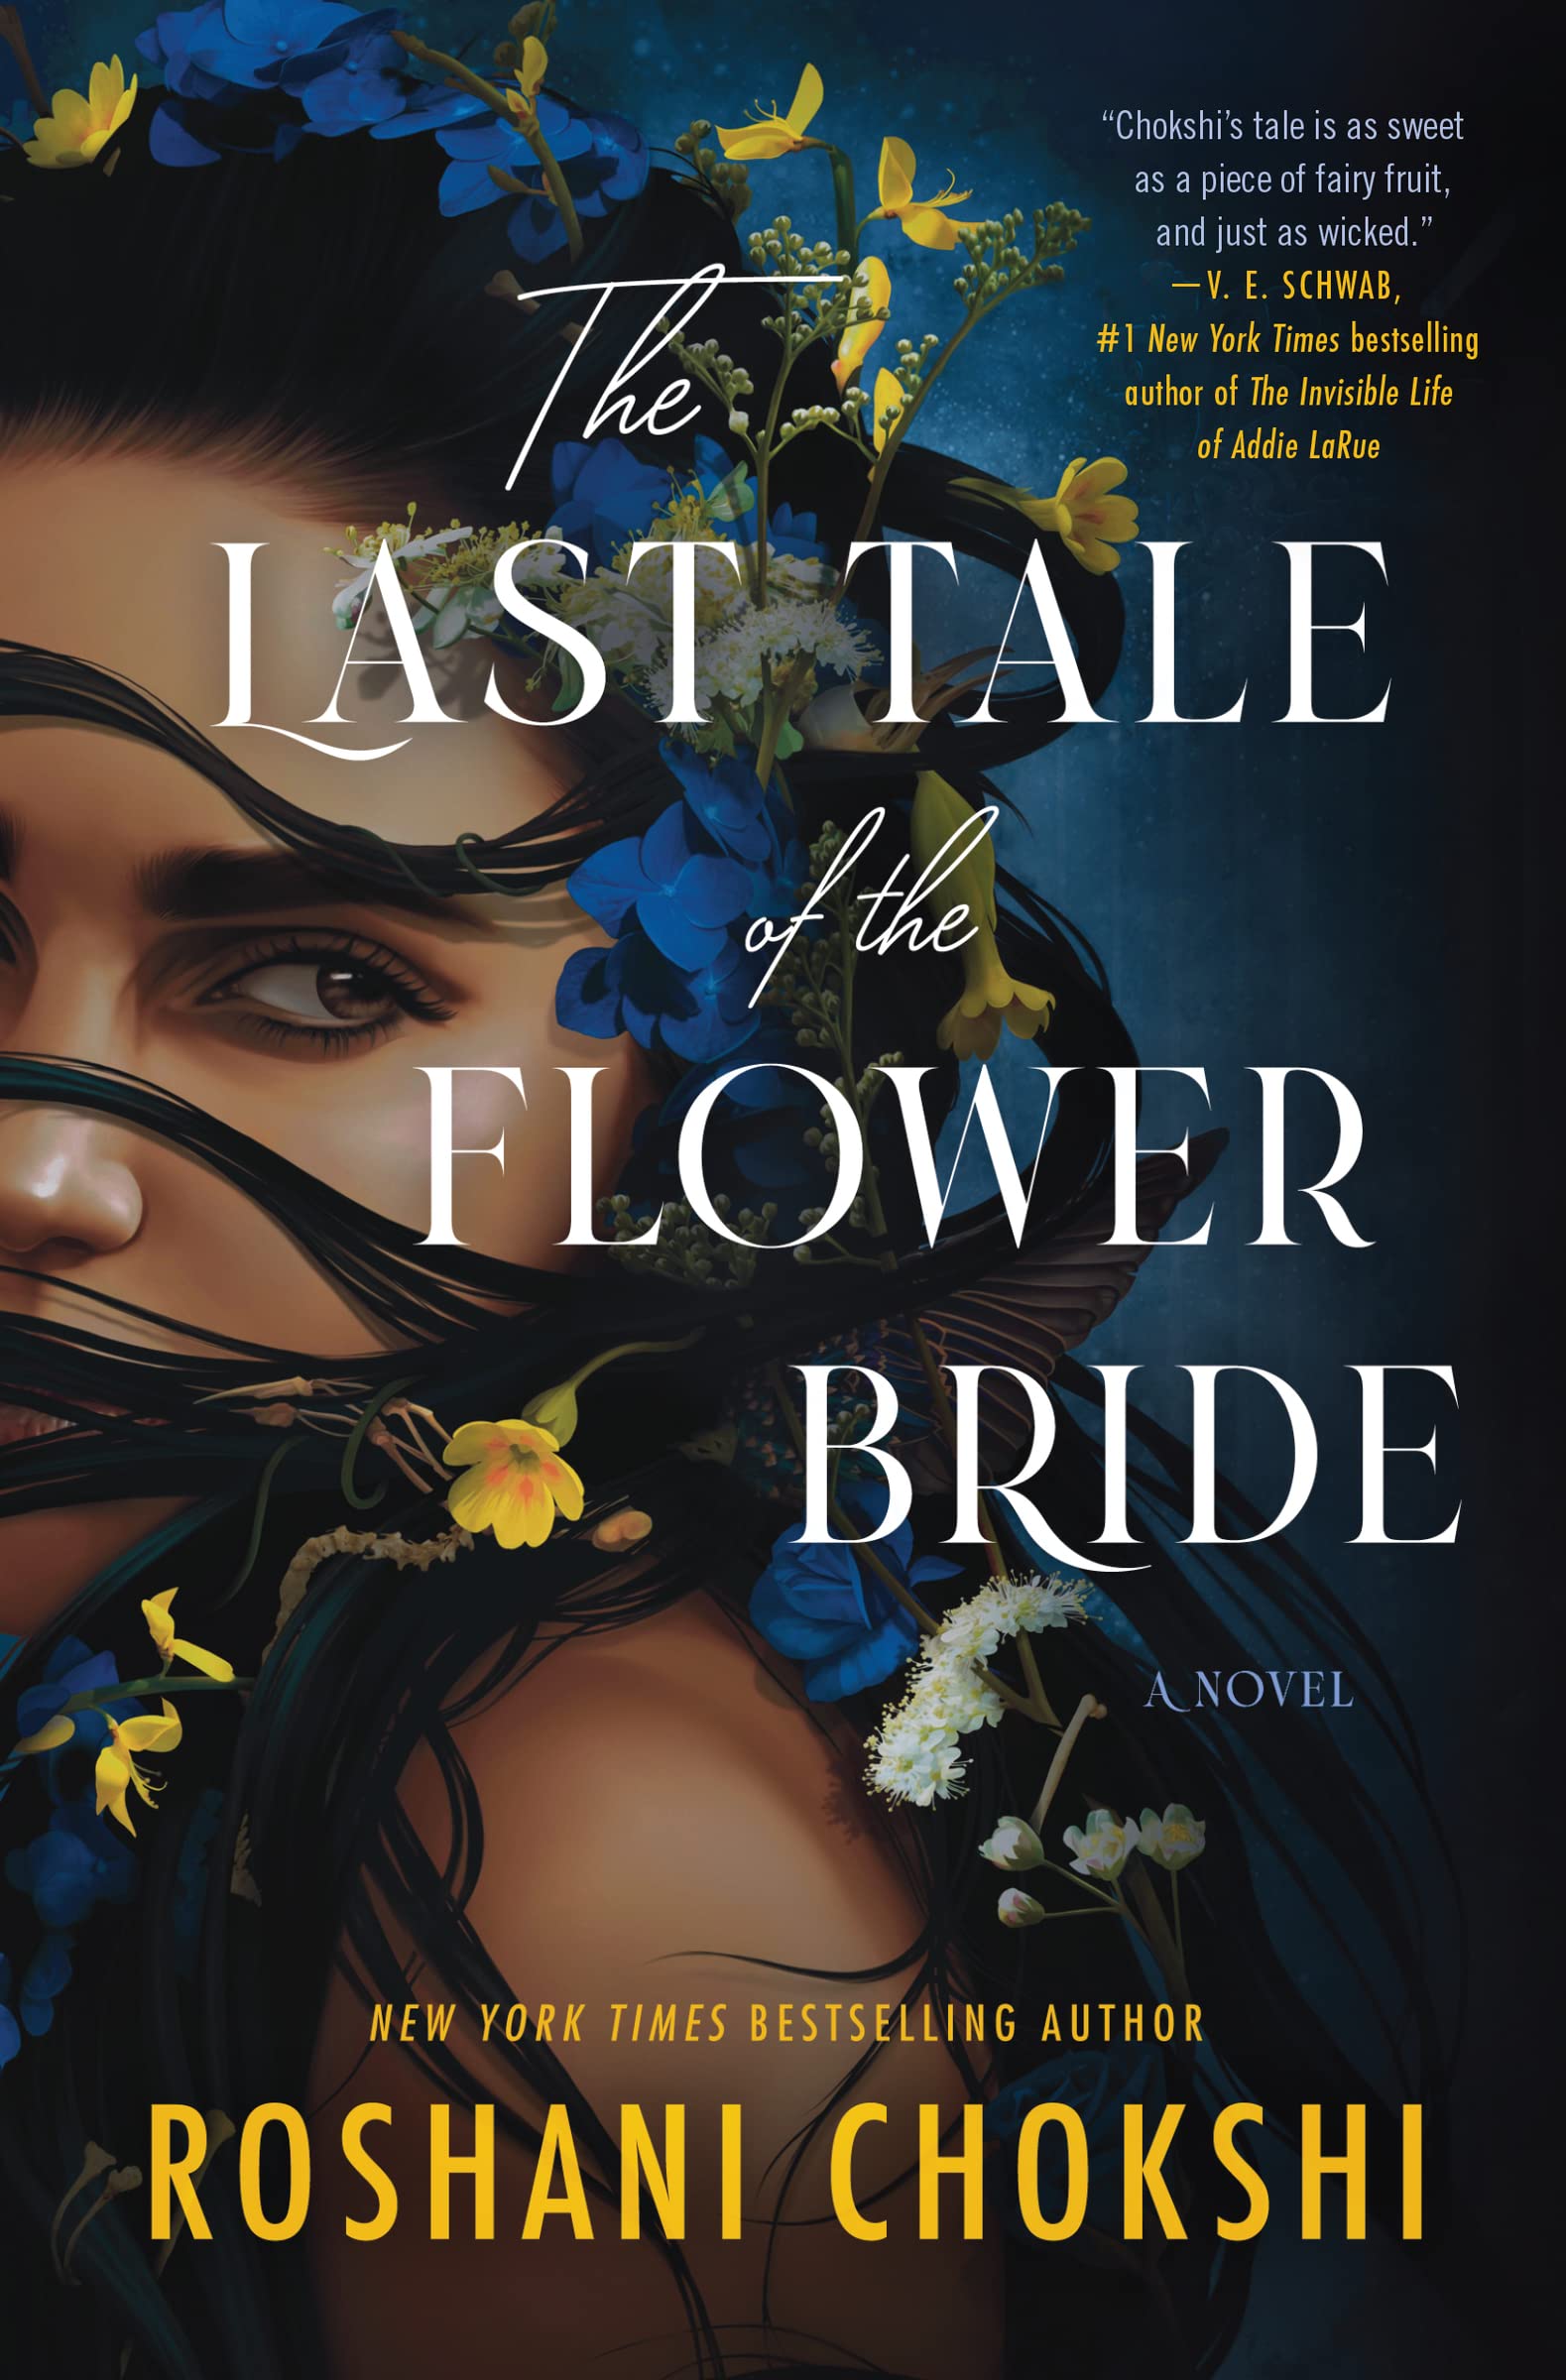 Image for "The Last Tale of the Flower Bride"